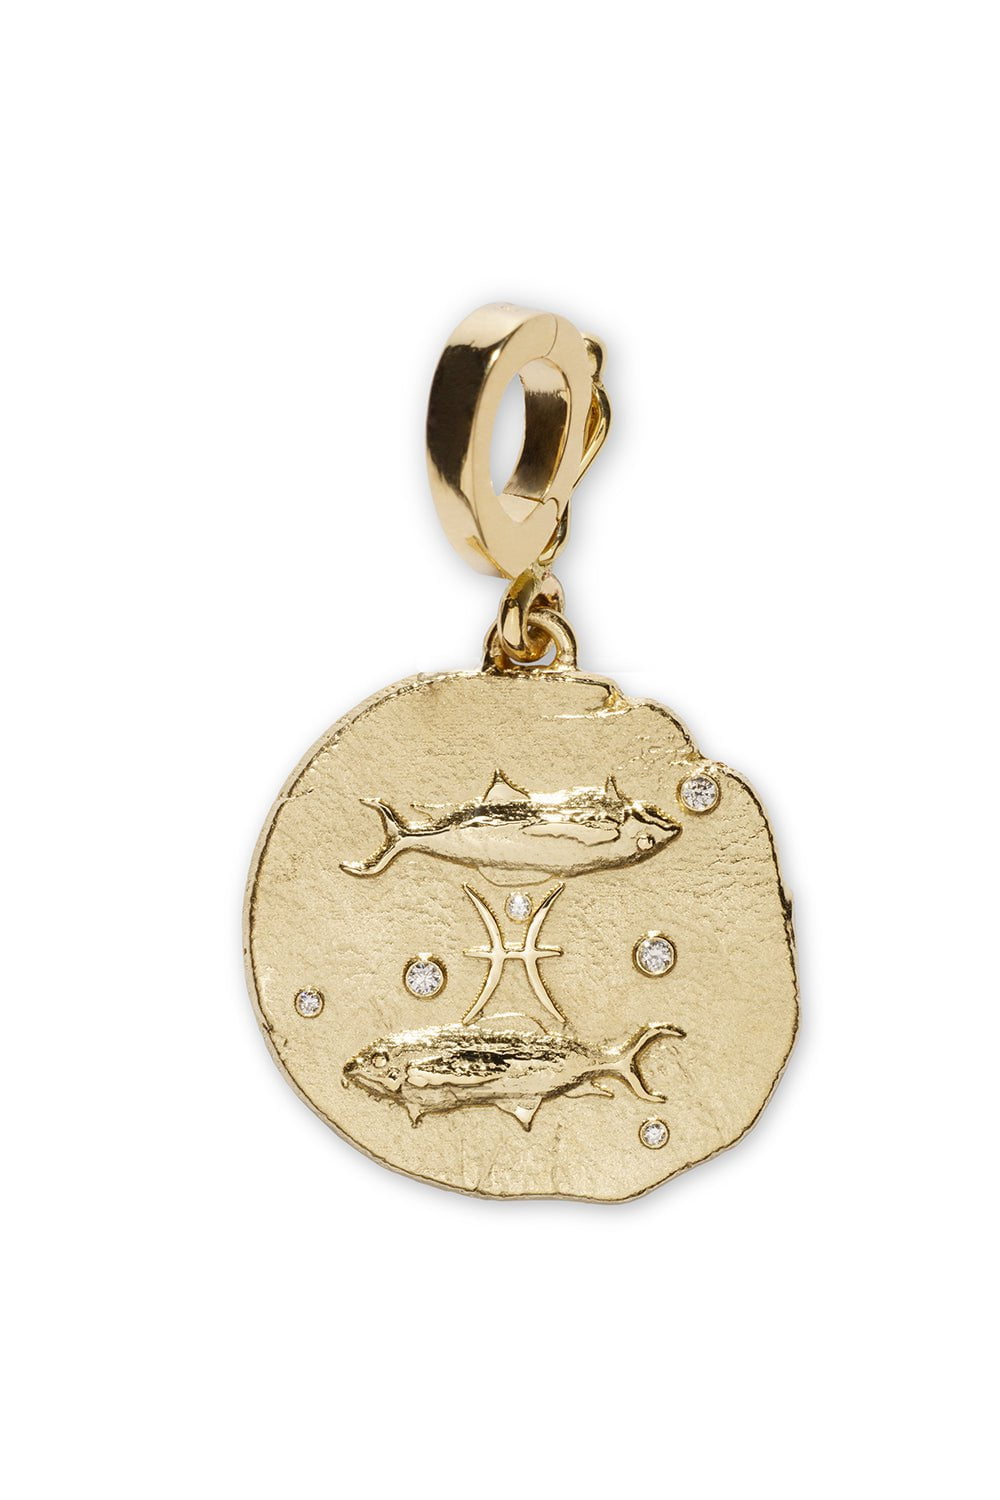 AZLEE-Of the Stars Pisces Small Coin-YELLOW GOLD